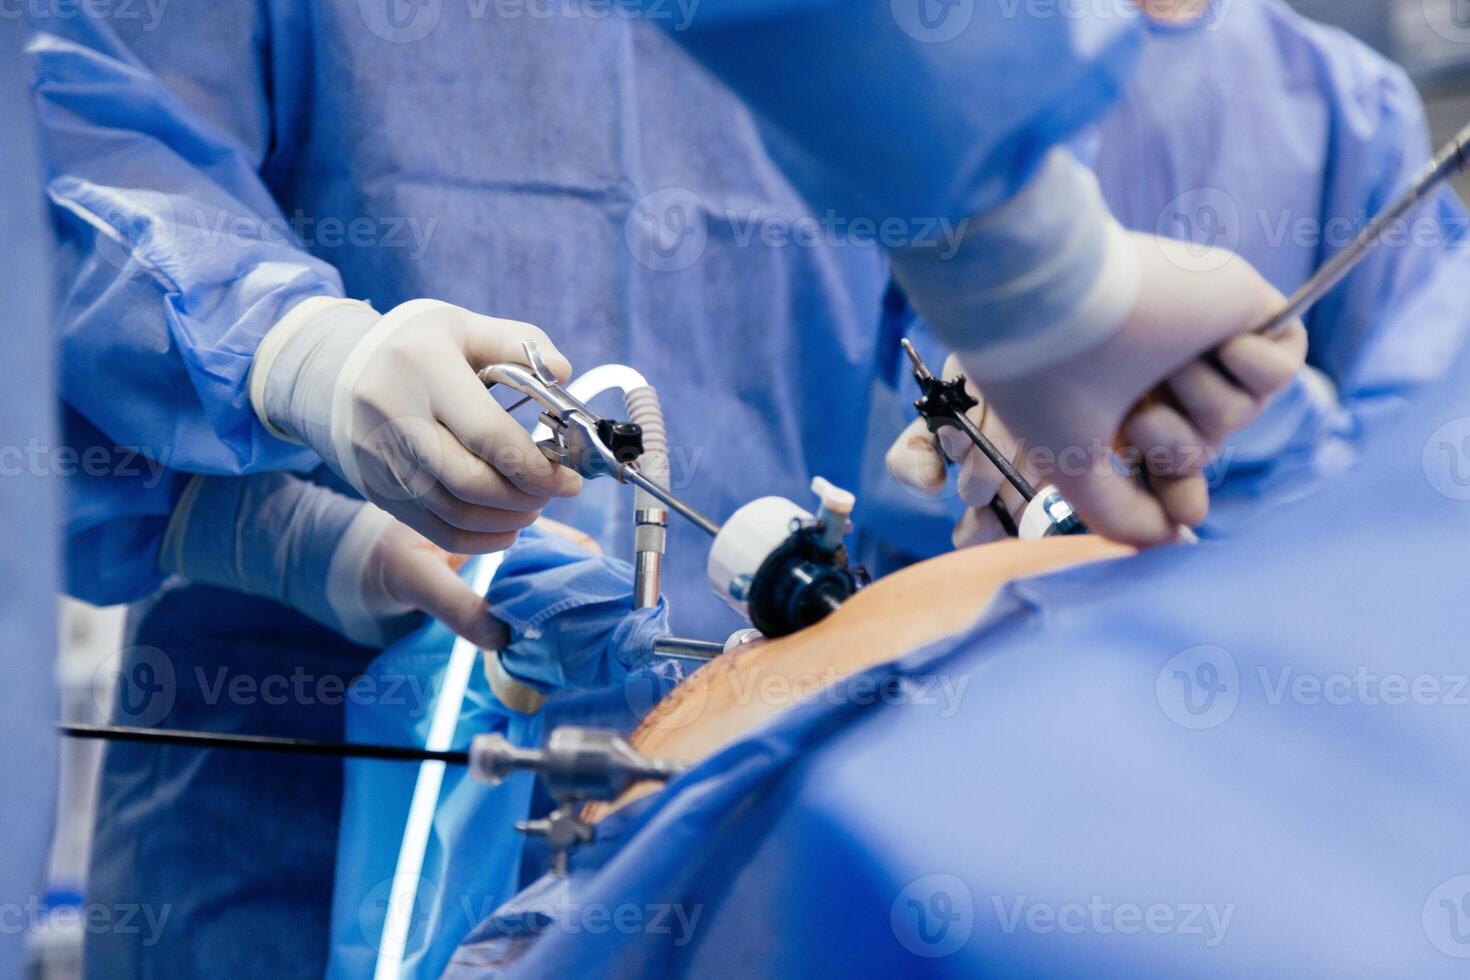 Instruments for gastroscopy and colonoscopy close-up. The doctor holds a flexible endoscope and biopsy forceps in his hands. Endoscopy and minimally invasive surgery photo